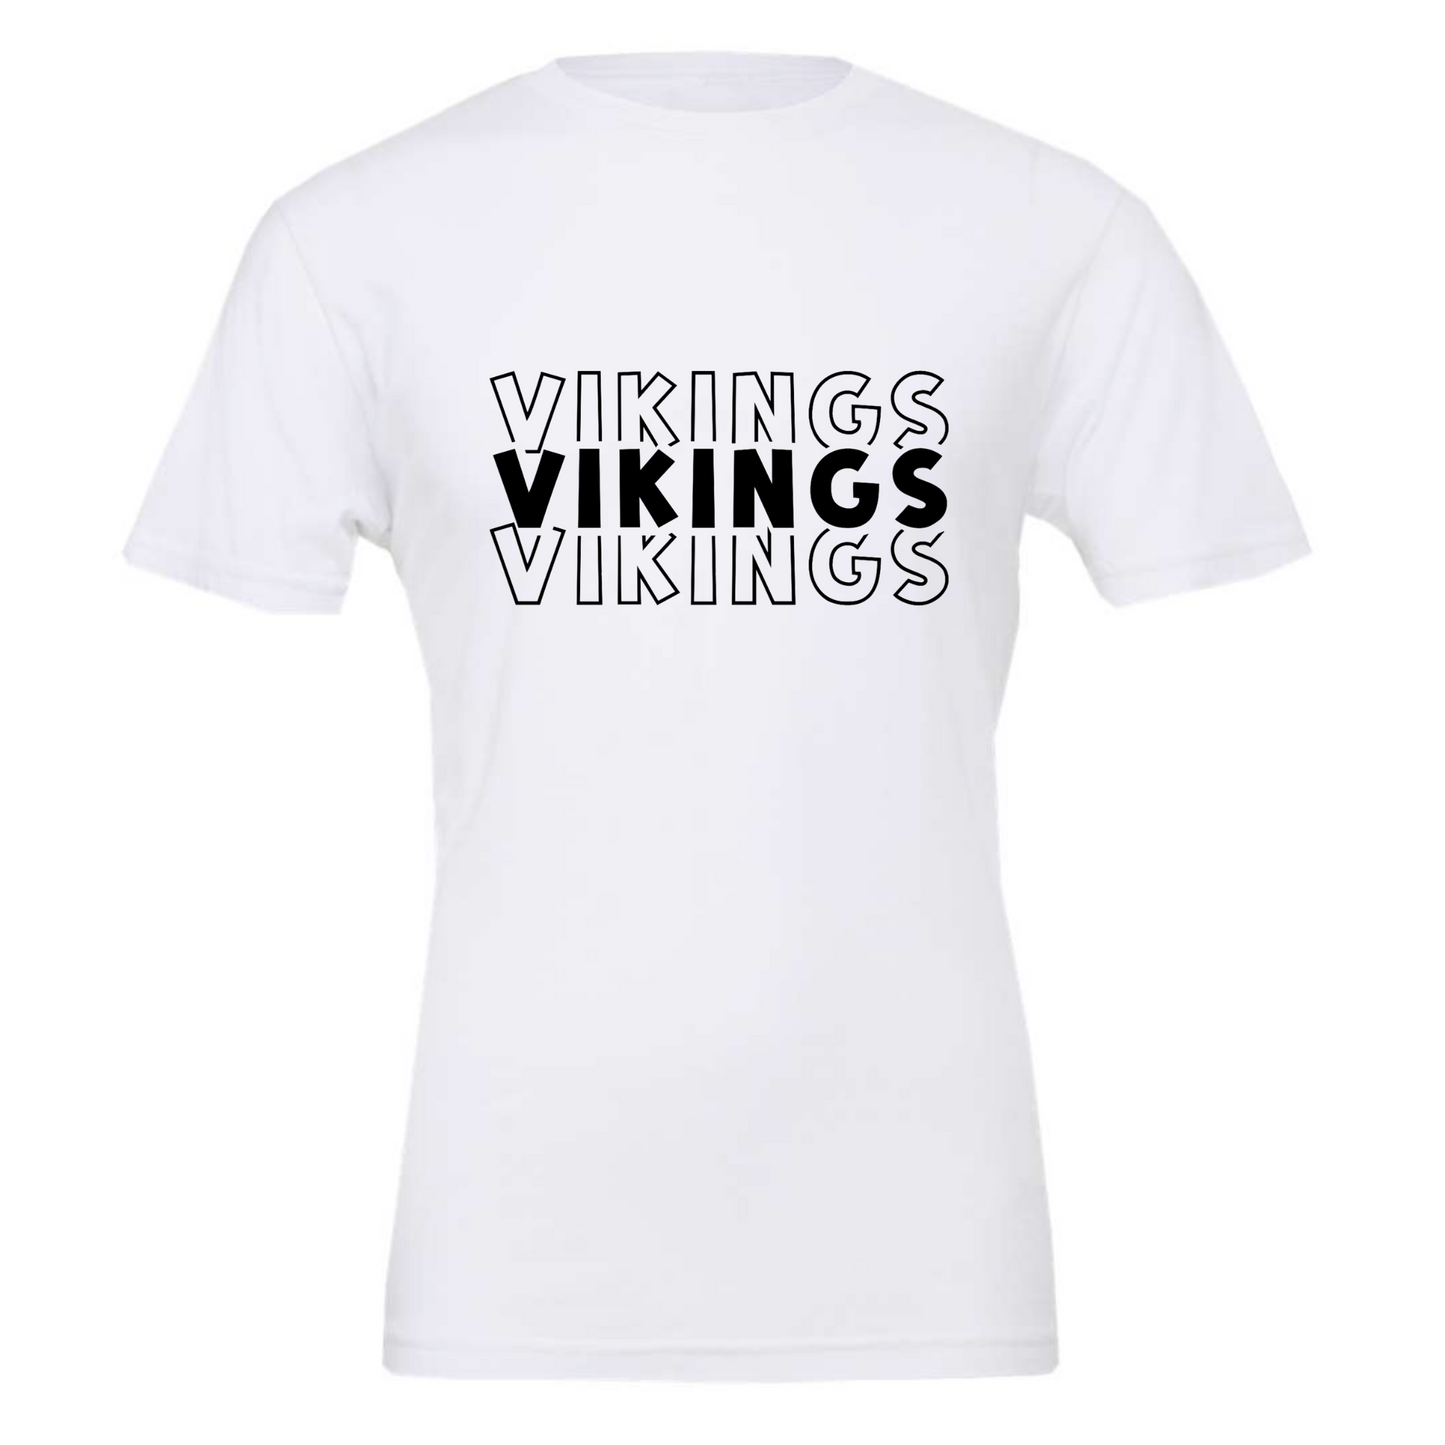 Vikings - T-Shirt - front view - white with black writing